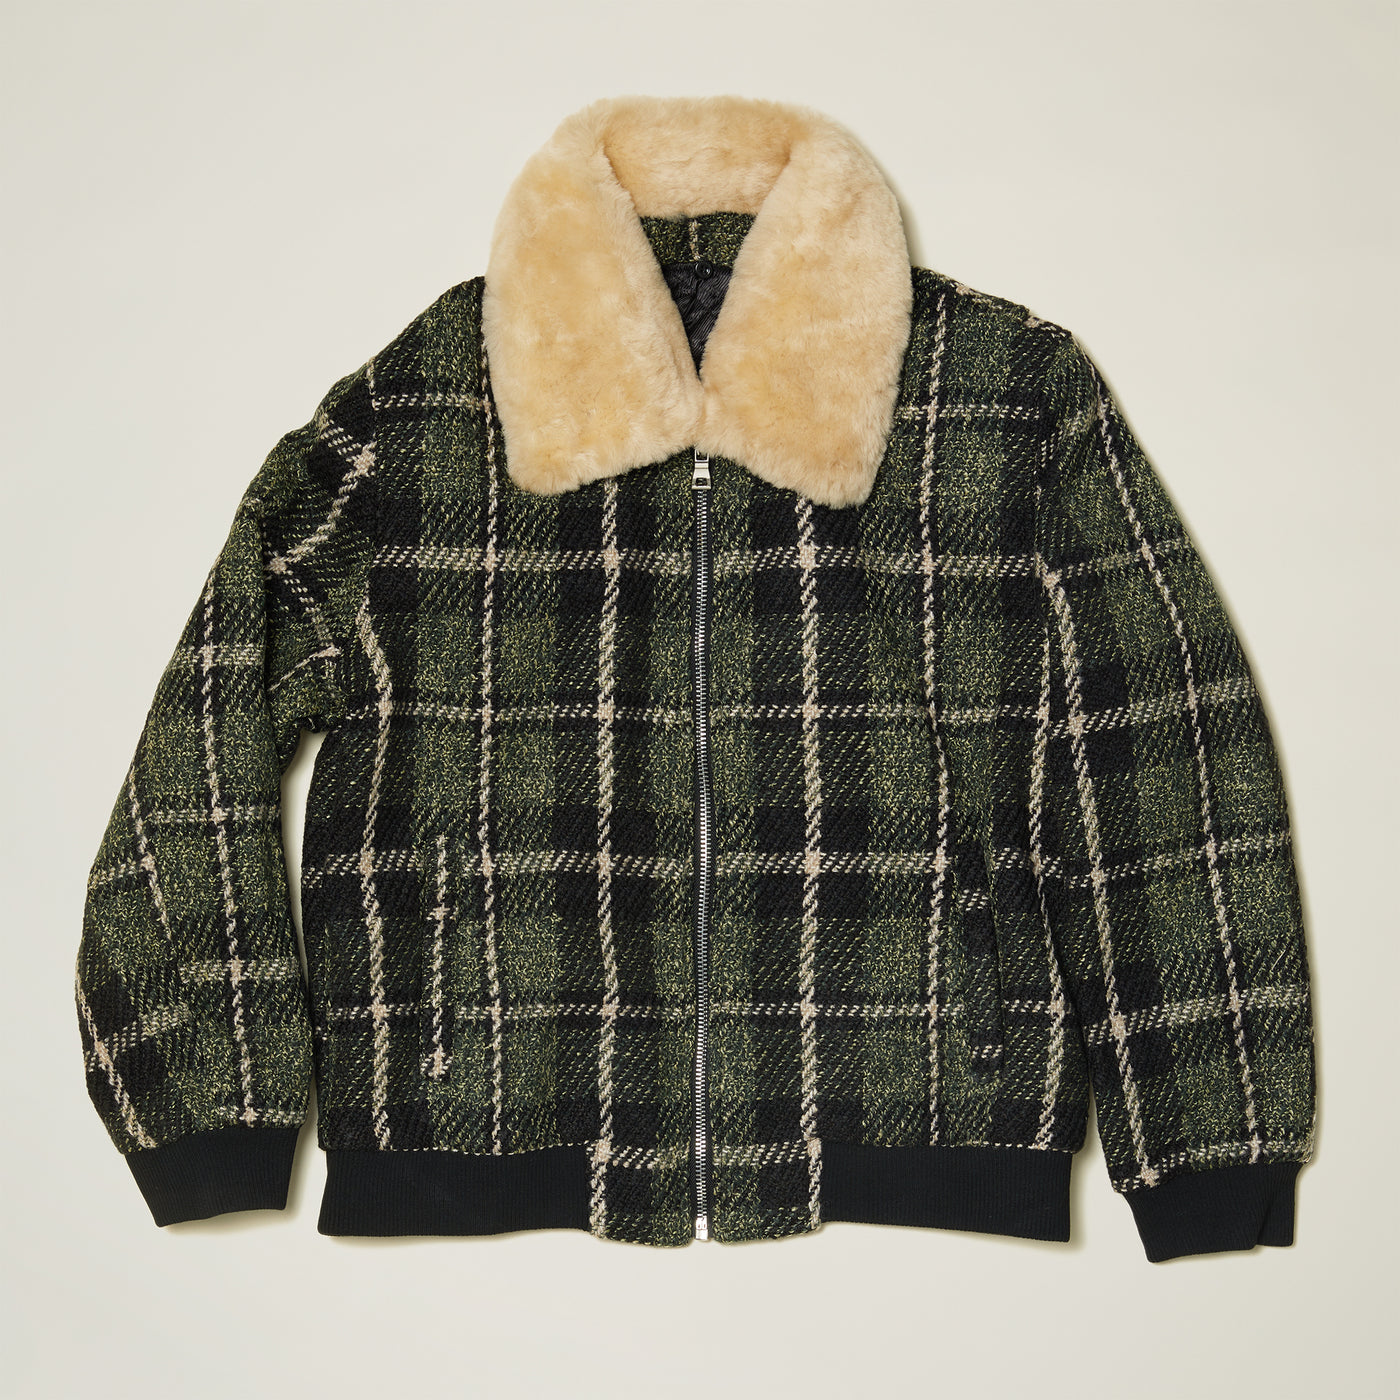 Wool Bomber with Shearling Collar - INSERCH